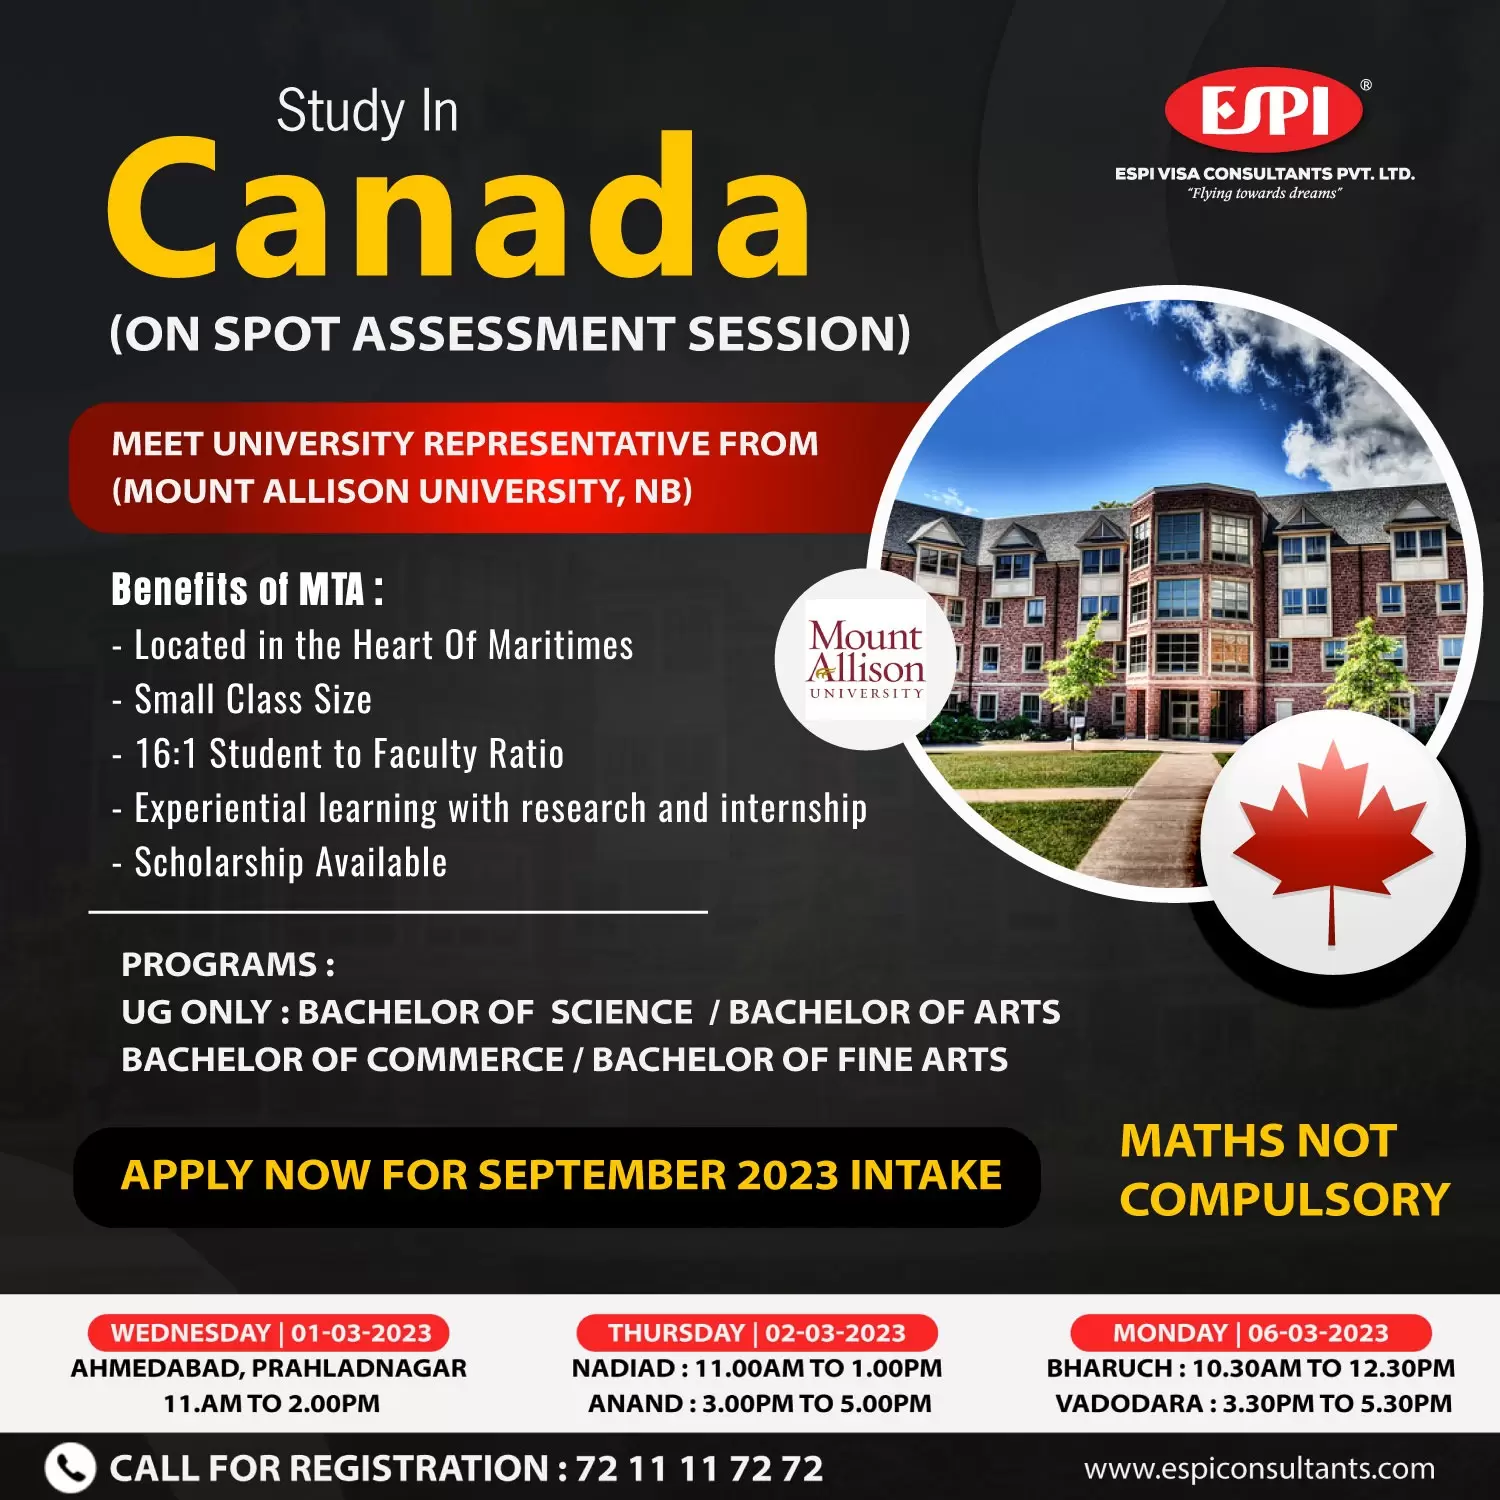 Apply Now For September 2023 Intake At Study In Canada